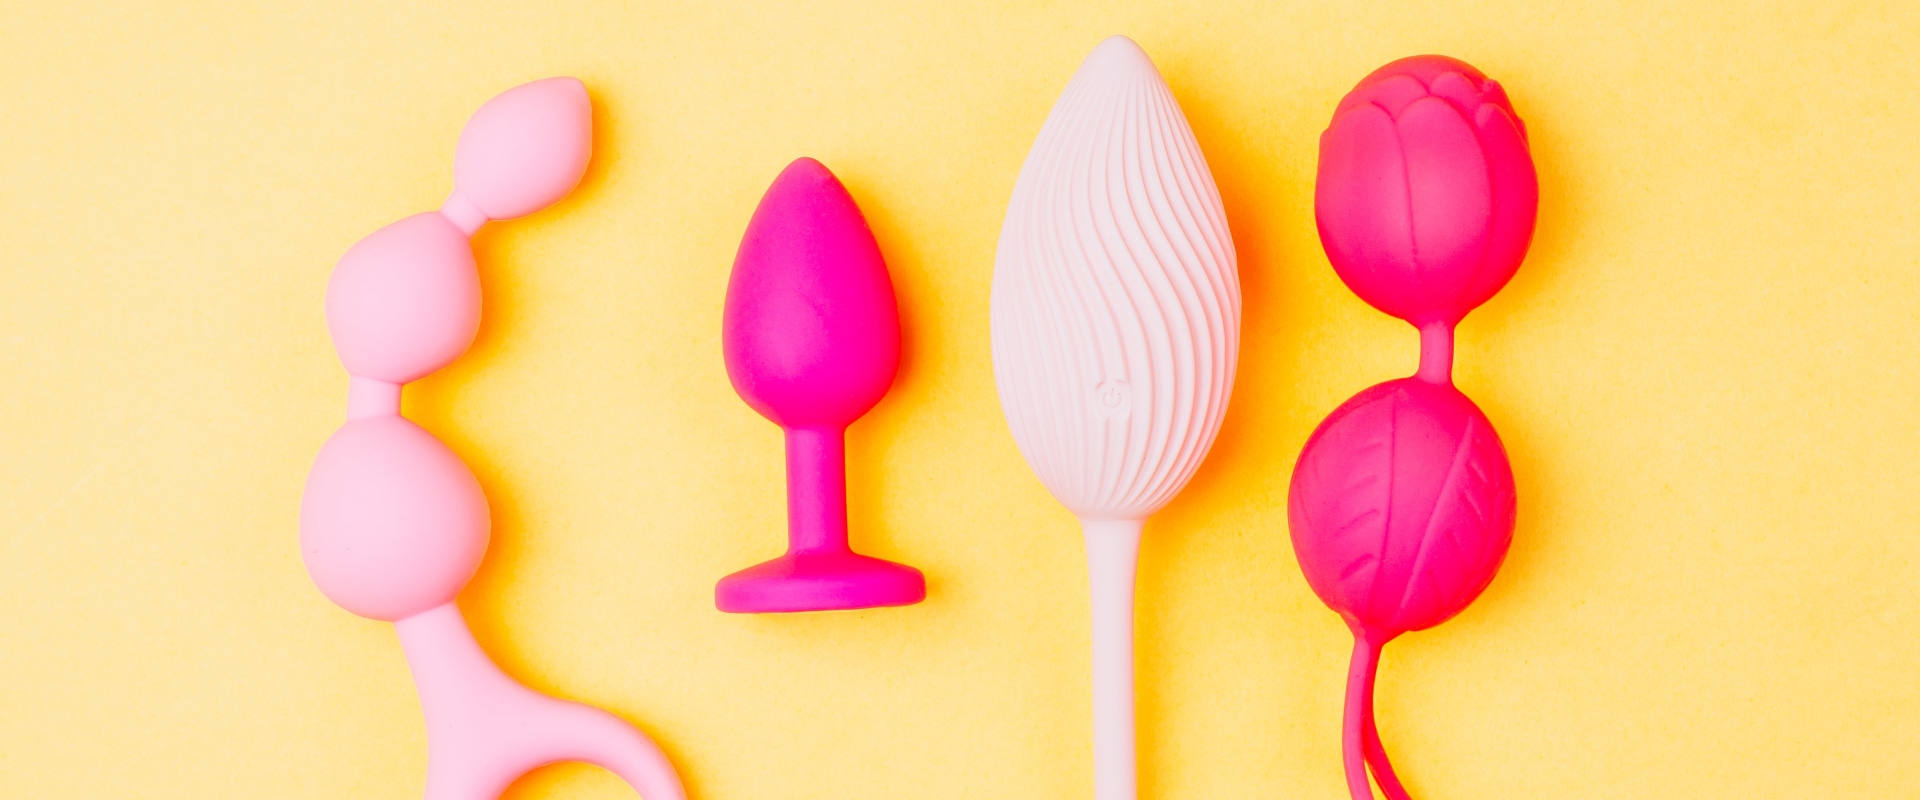 Everything You Need to Know About Adult Toys